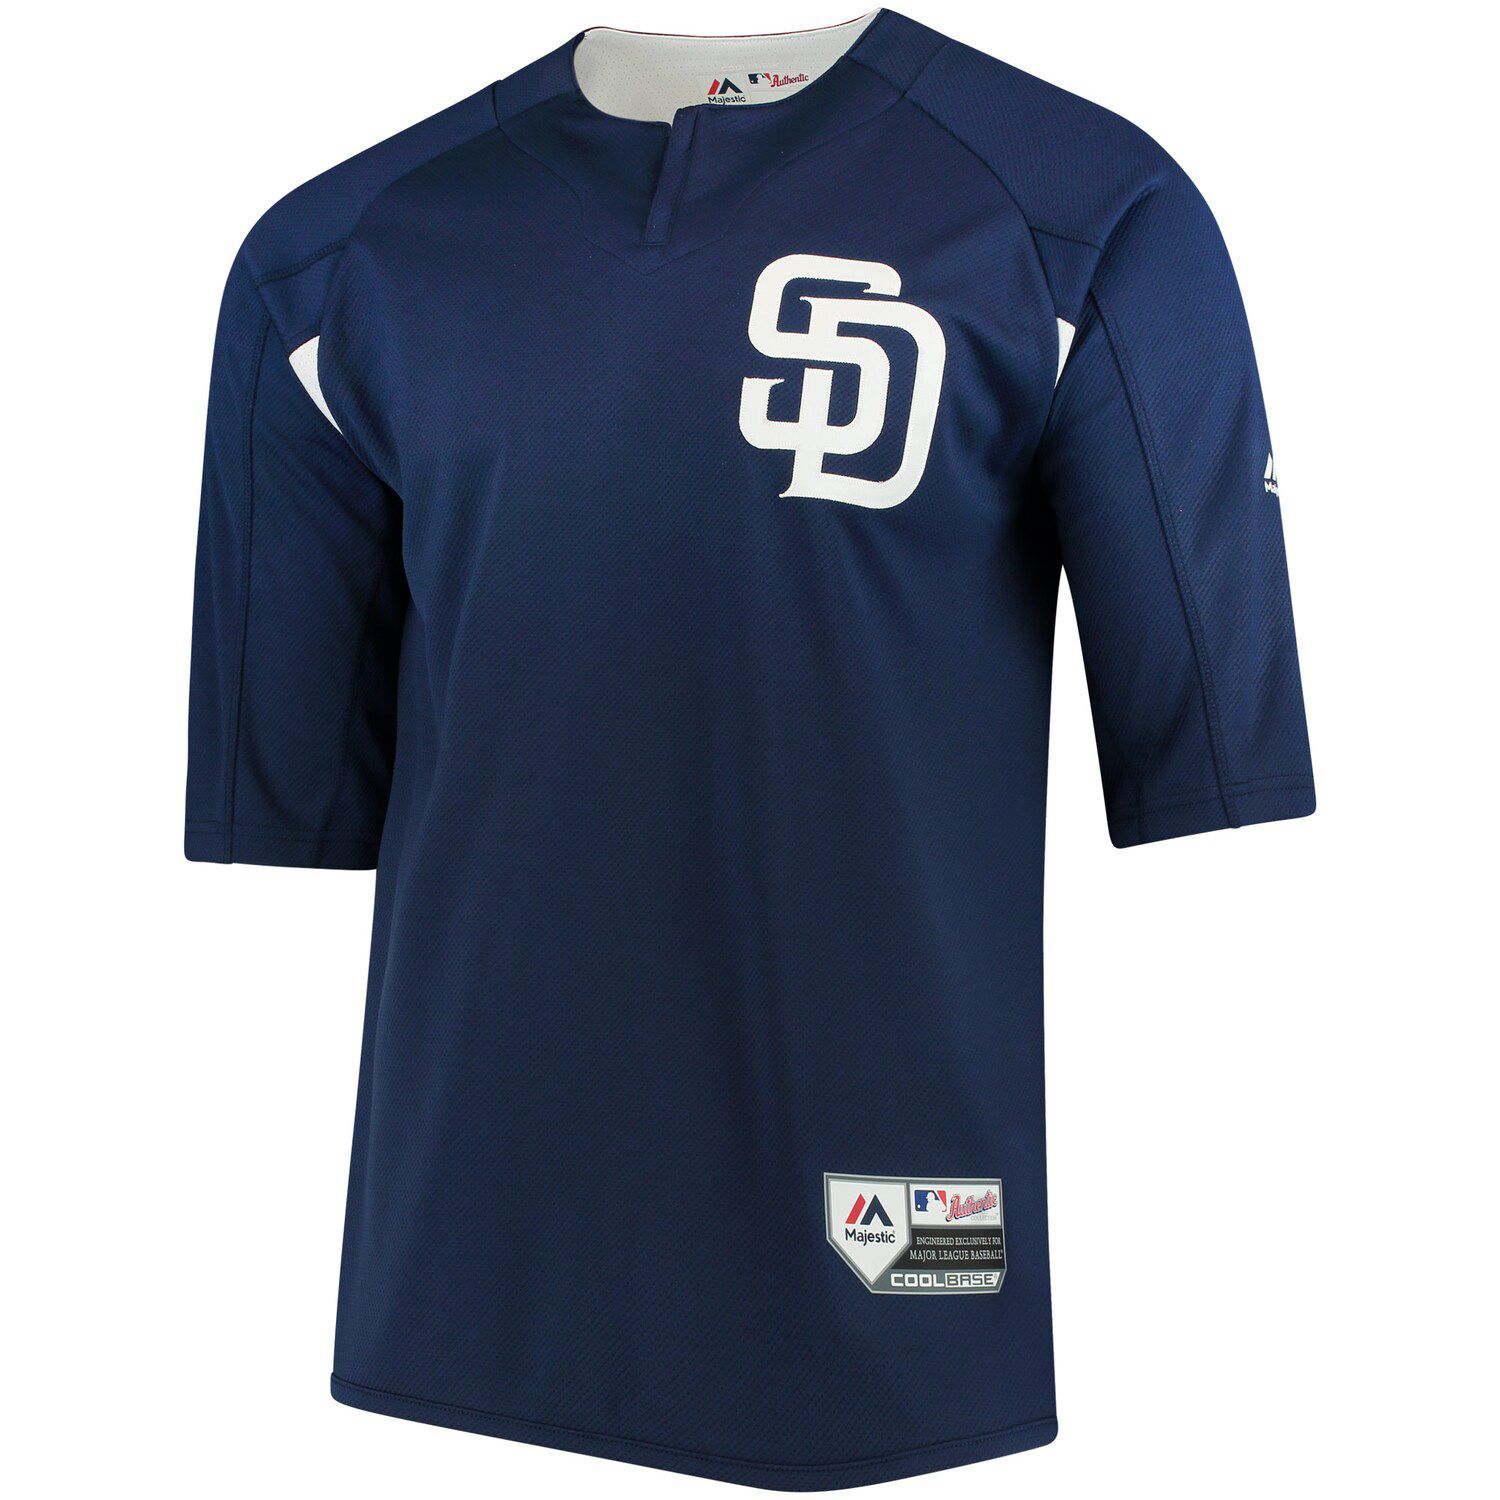 Kirk Gibson Detroit Tigers Mitchell & Ness Youth Cooperstown Collection Mesh Batting Practice Jersey - Navy